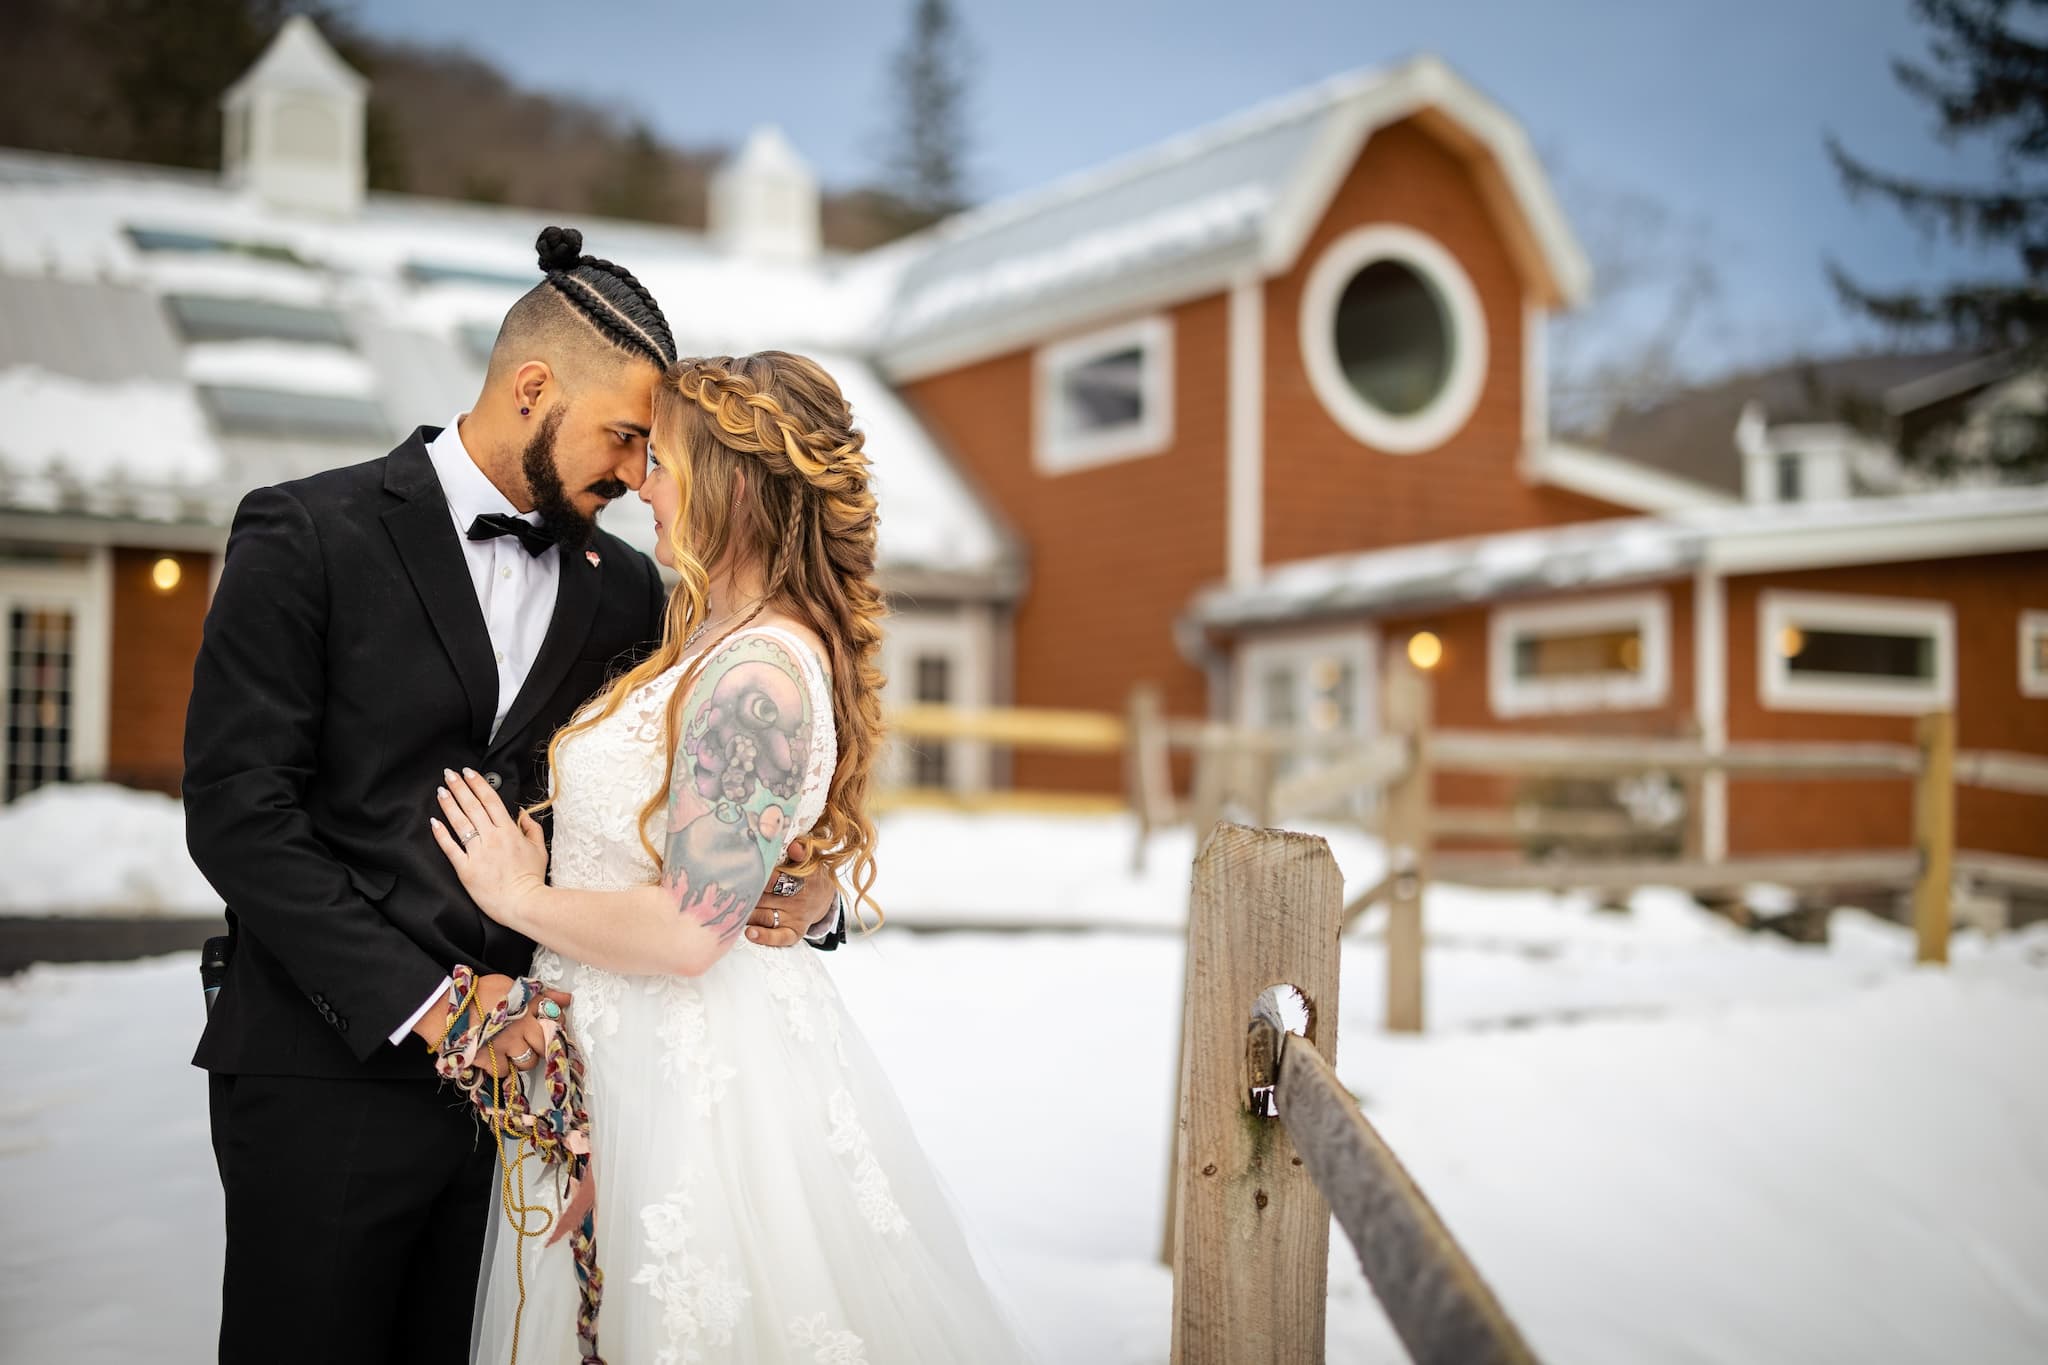 A Delightful Experience at Full Moon Resort, Big Indian, NY: A Wedding Venue Review